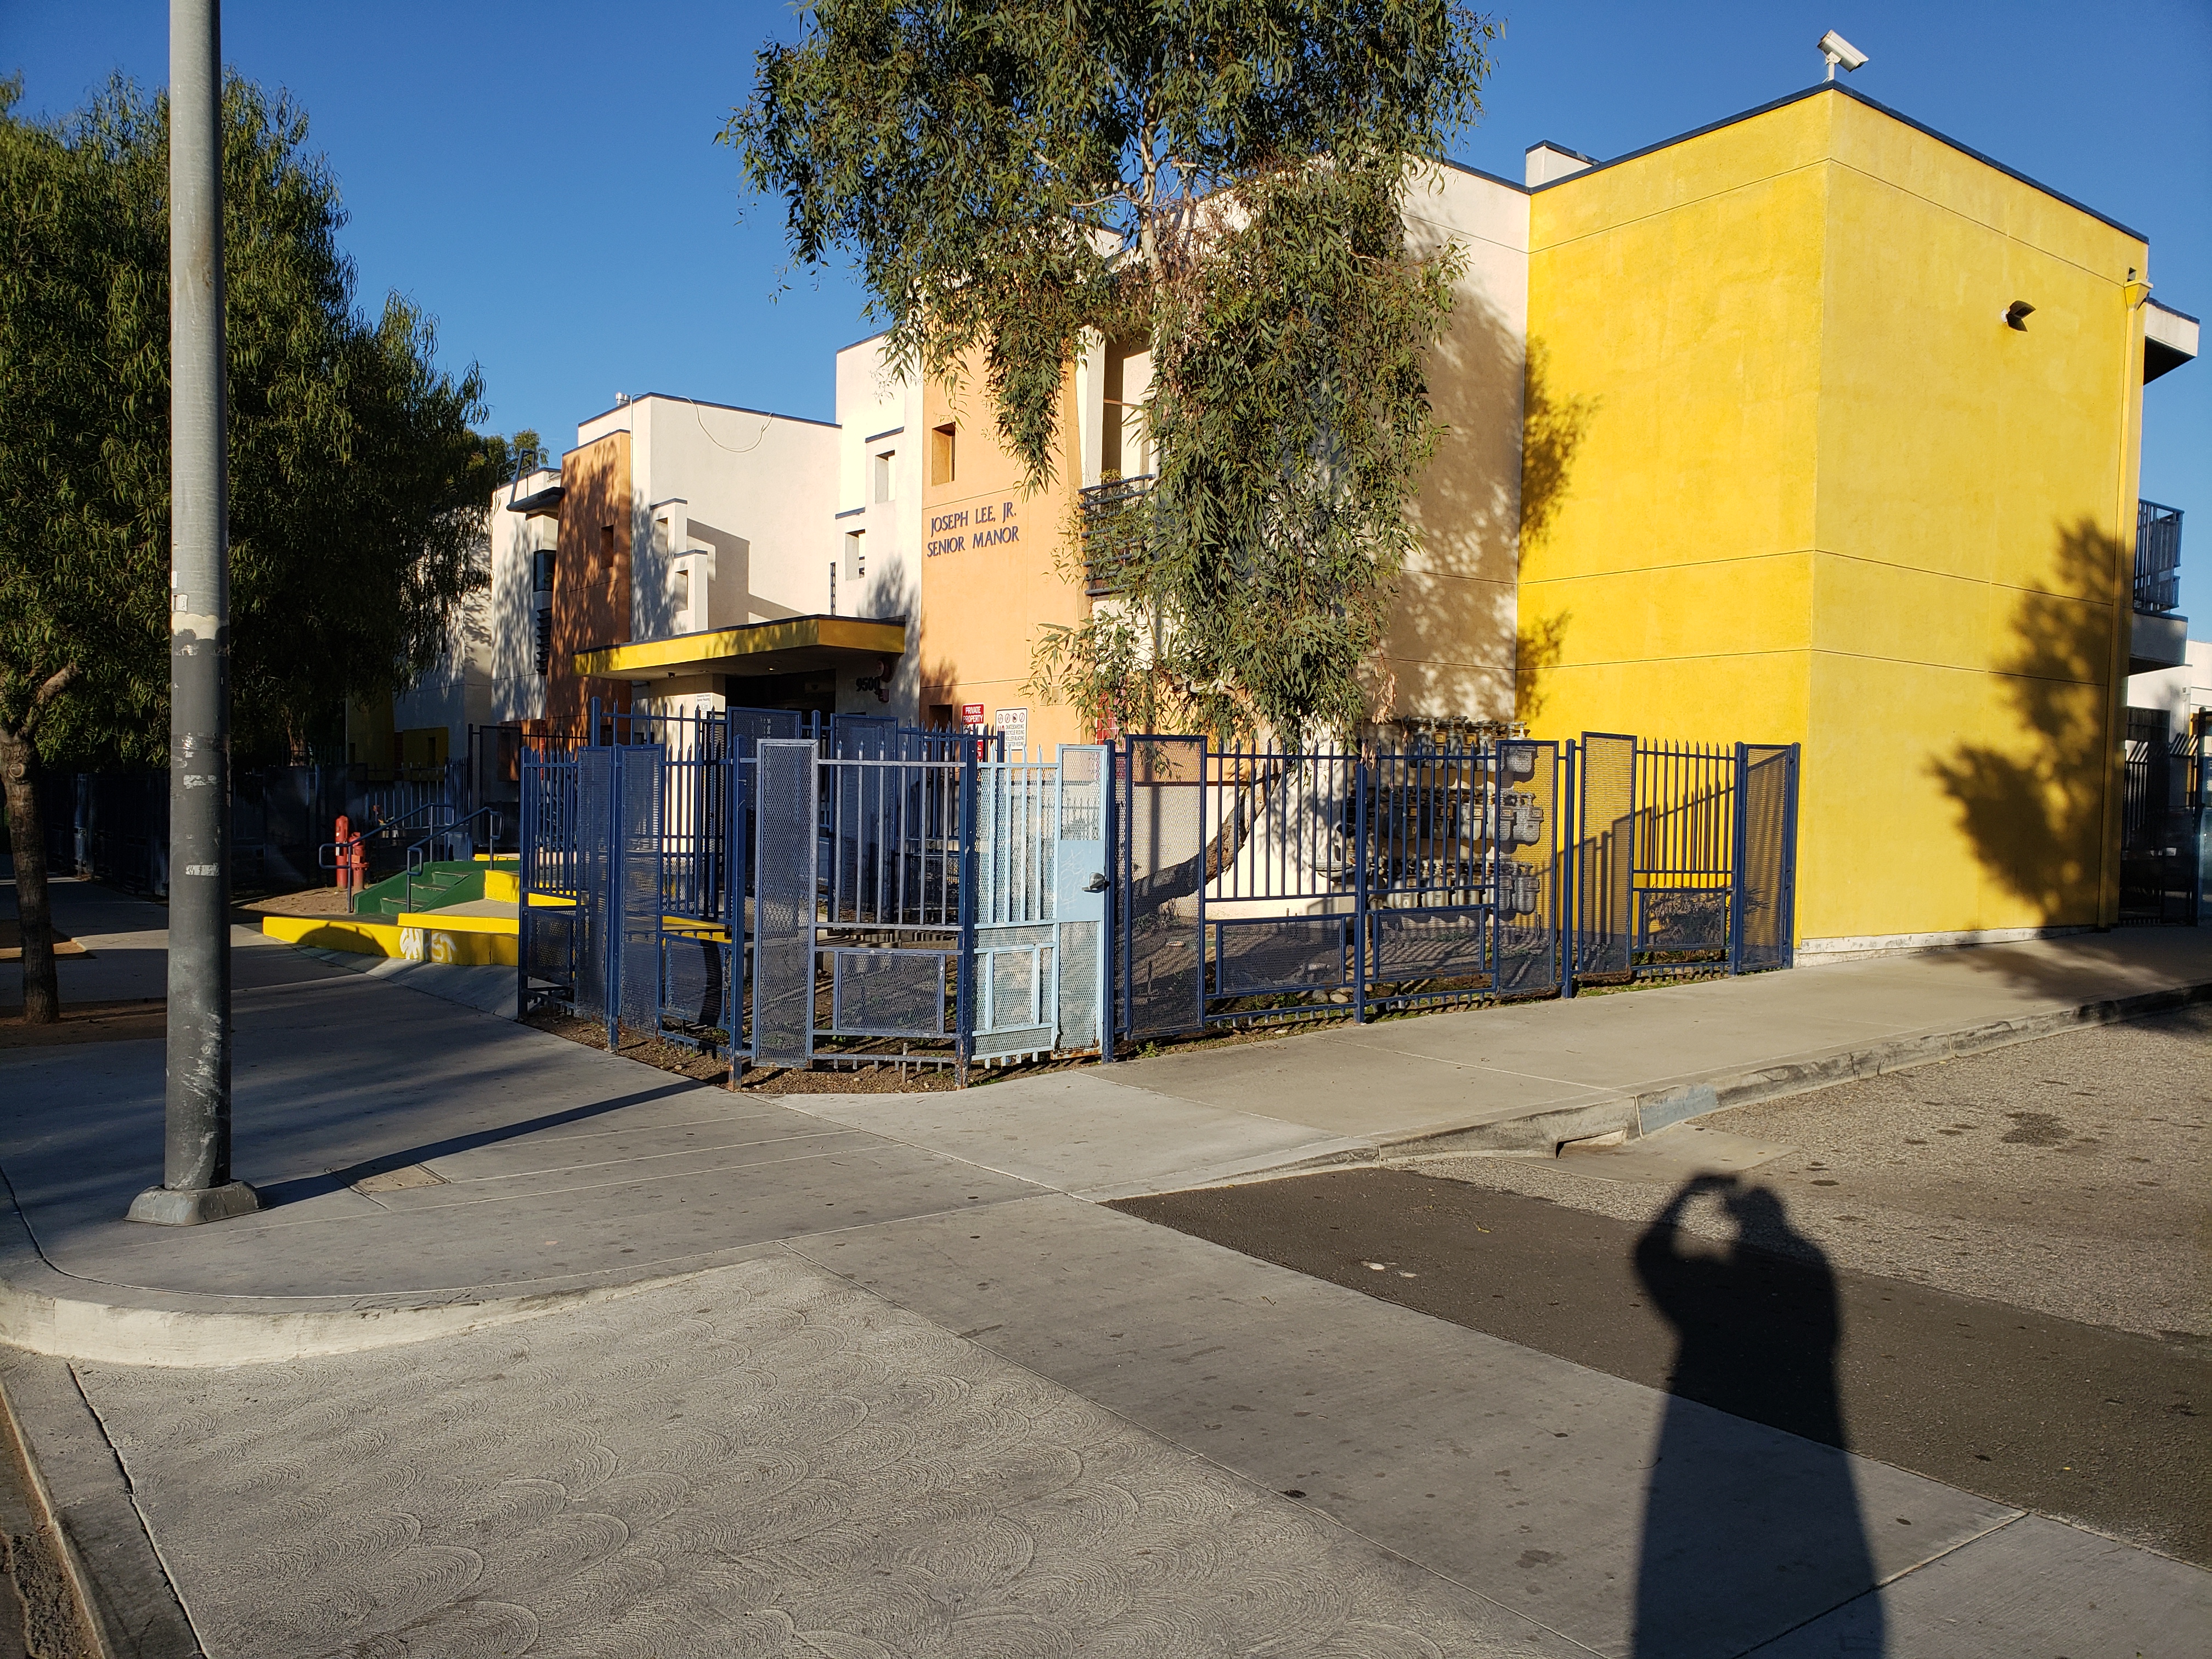 Street view of Heavenly Vision Seniors Apartments, Yellow and White building with with a blue gate and a tall tree inside the gate